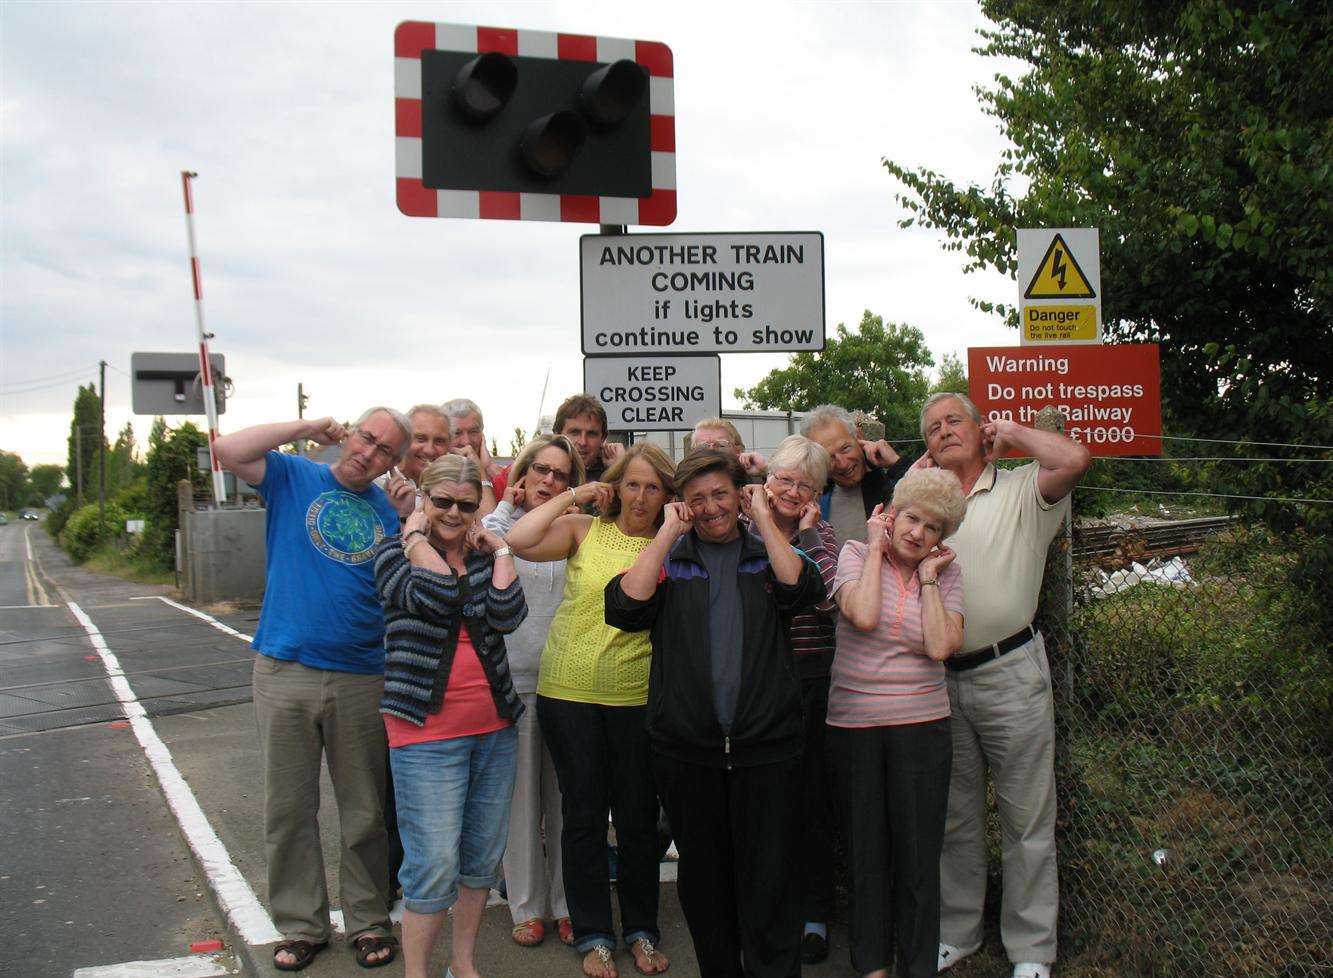 Residents of Ash Road area say level crossing alarm is too loud